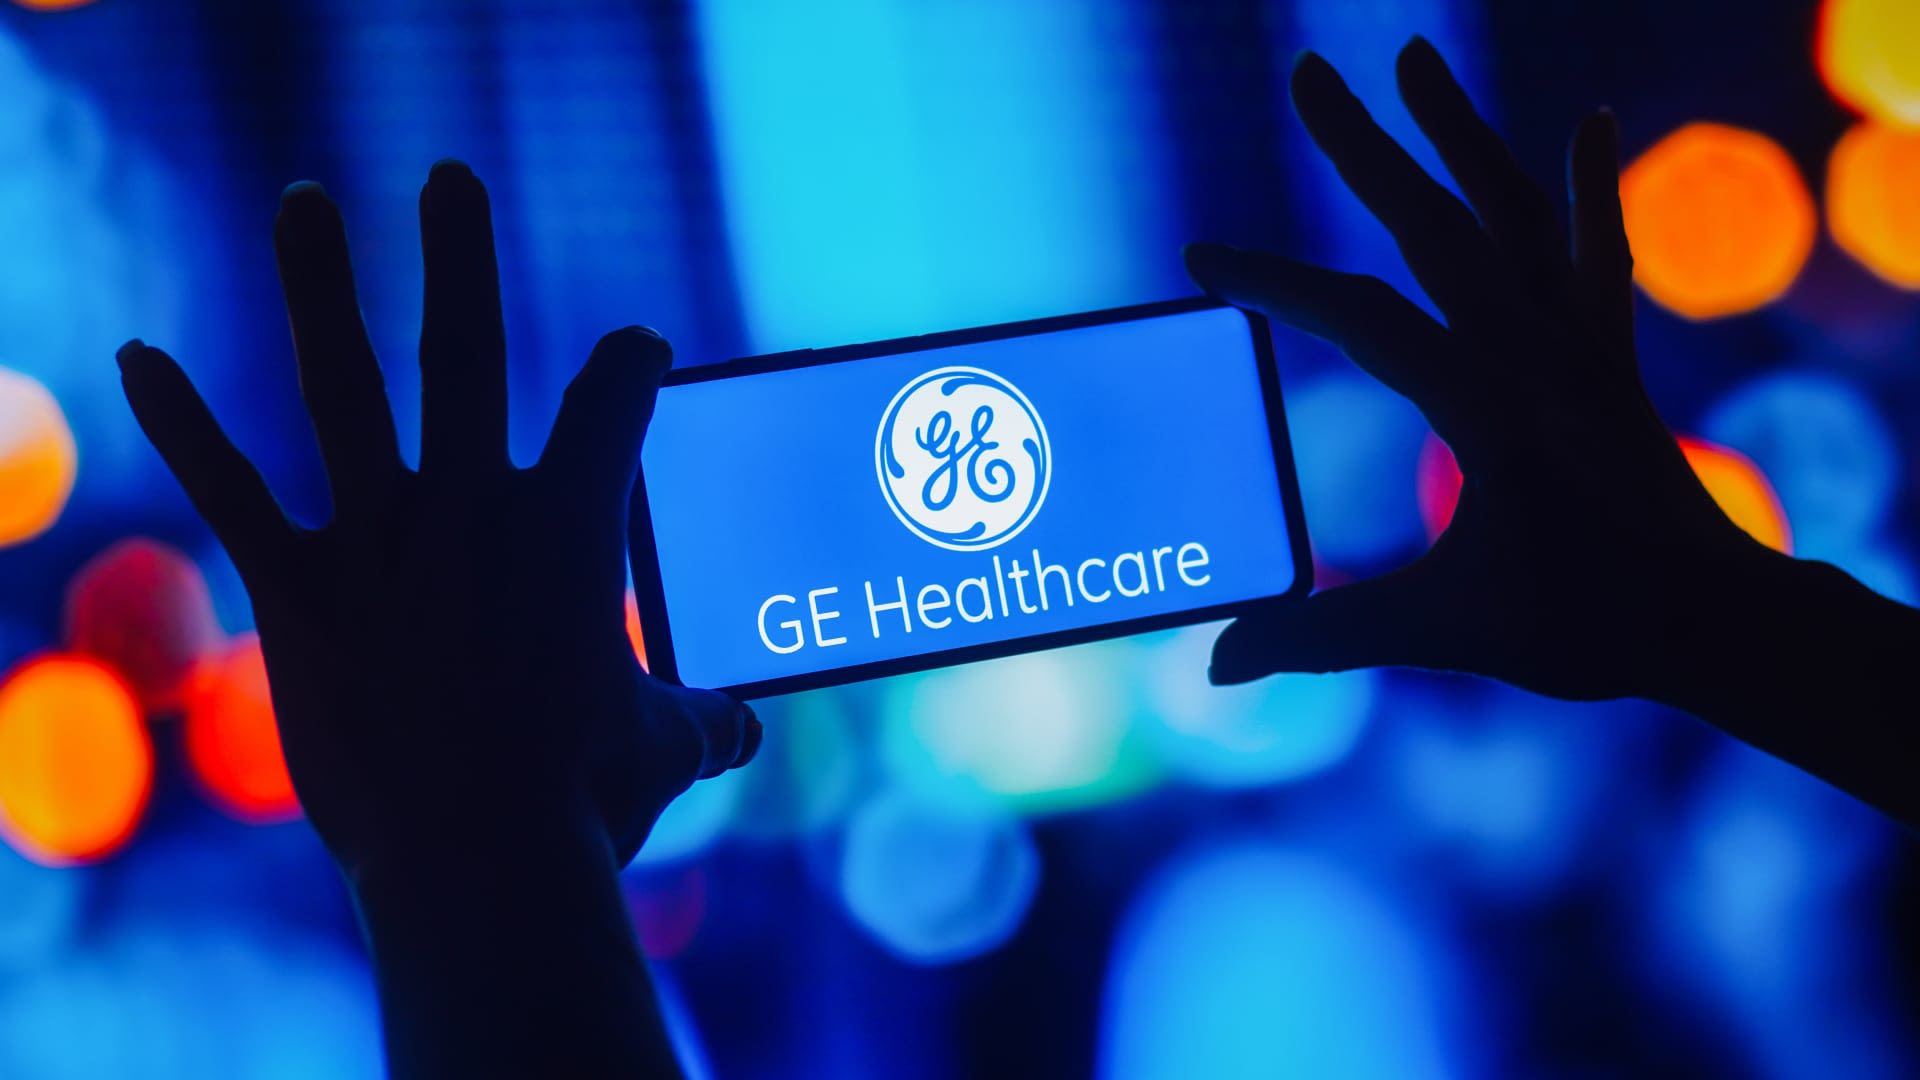 Citi elevates GE Healthcare to a top pick. Here's why we're not buying more shares just yet